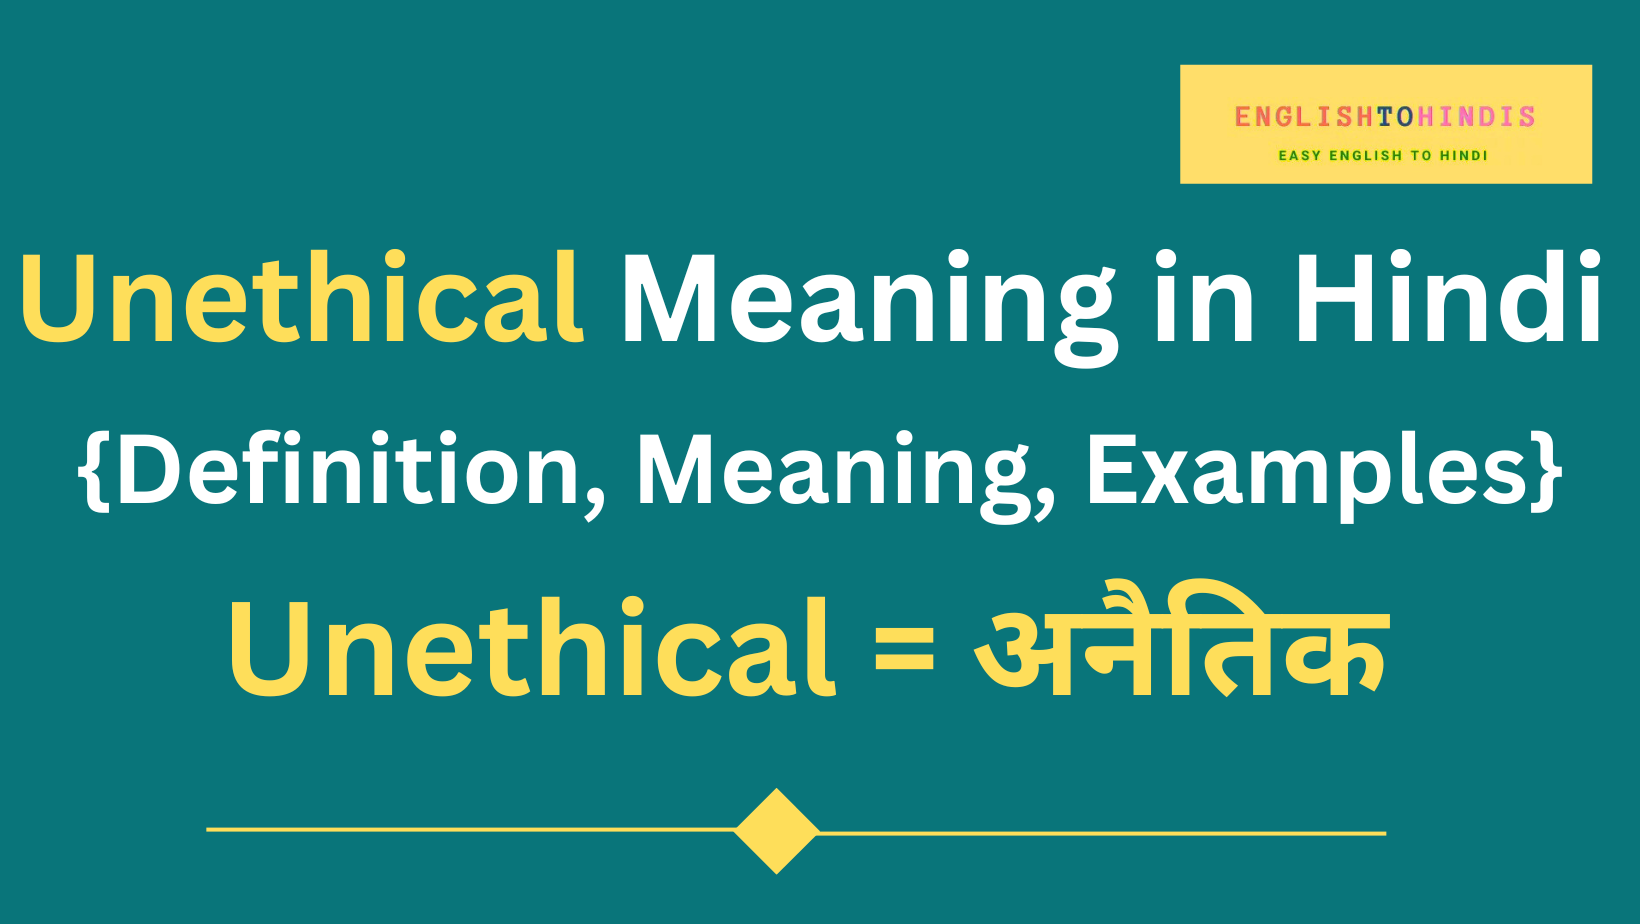 Unethical Meaning in Hindi